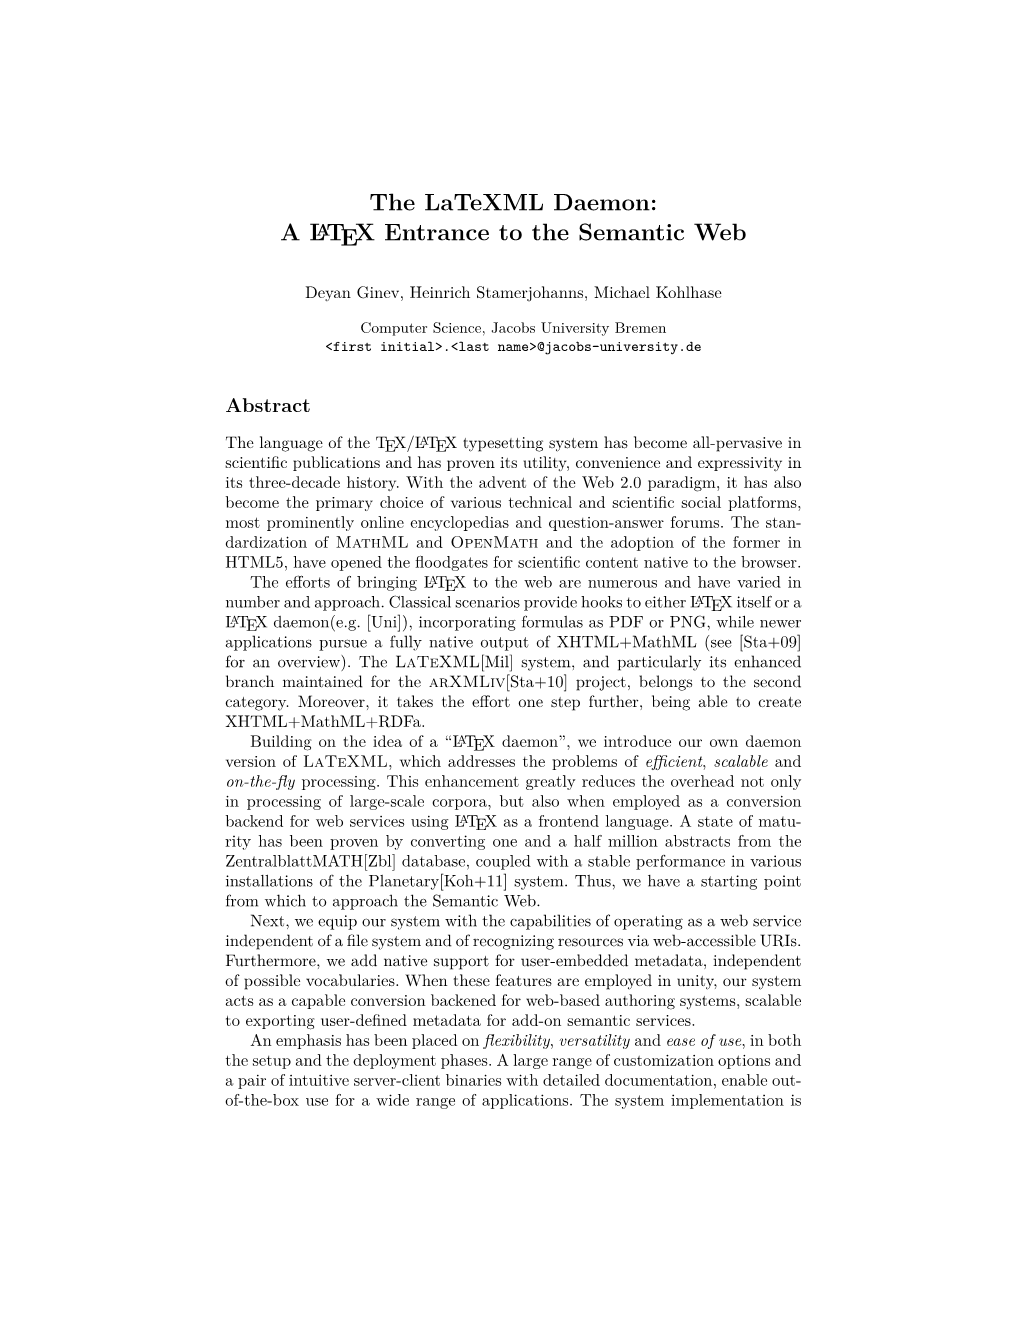 The Latexml Daemon: a LATEX Entrance to the Semantic